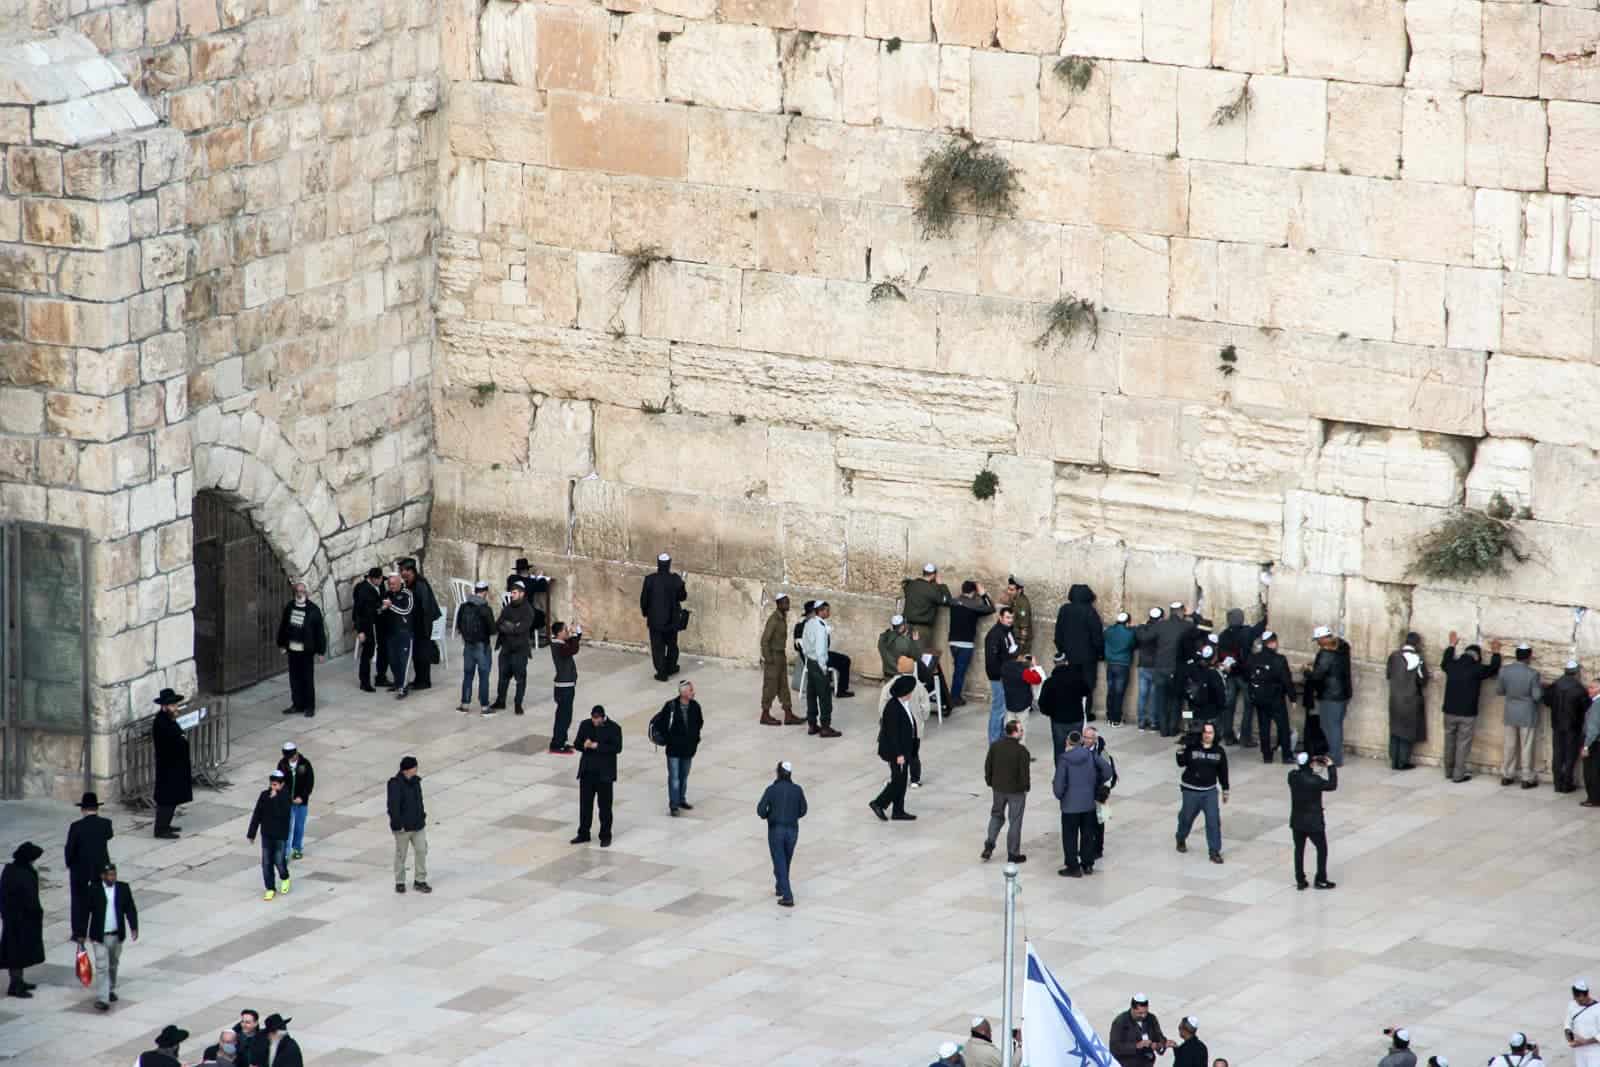 A large group of Jewish men dressed in black prayed against the the golden stone Western Wall in Jerusalem, Israel